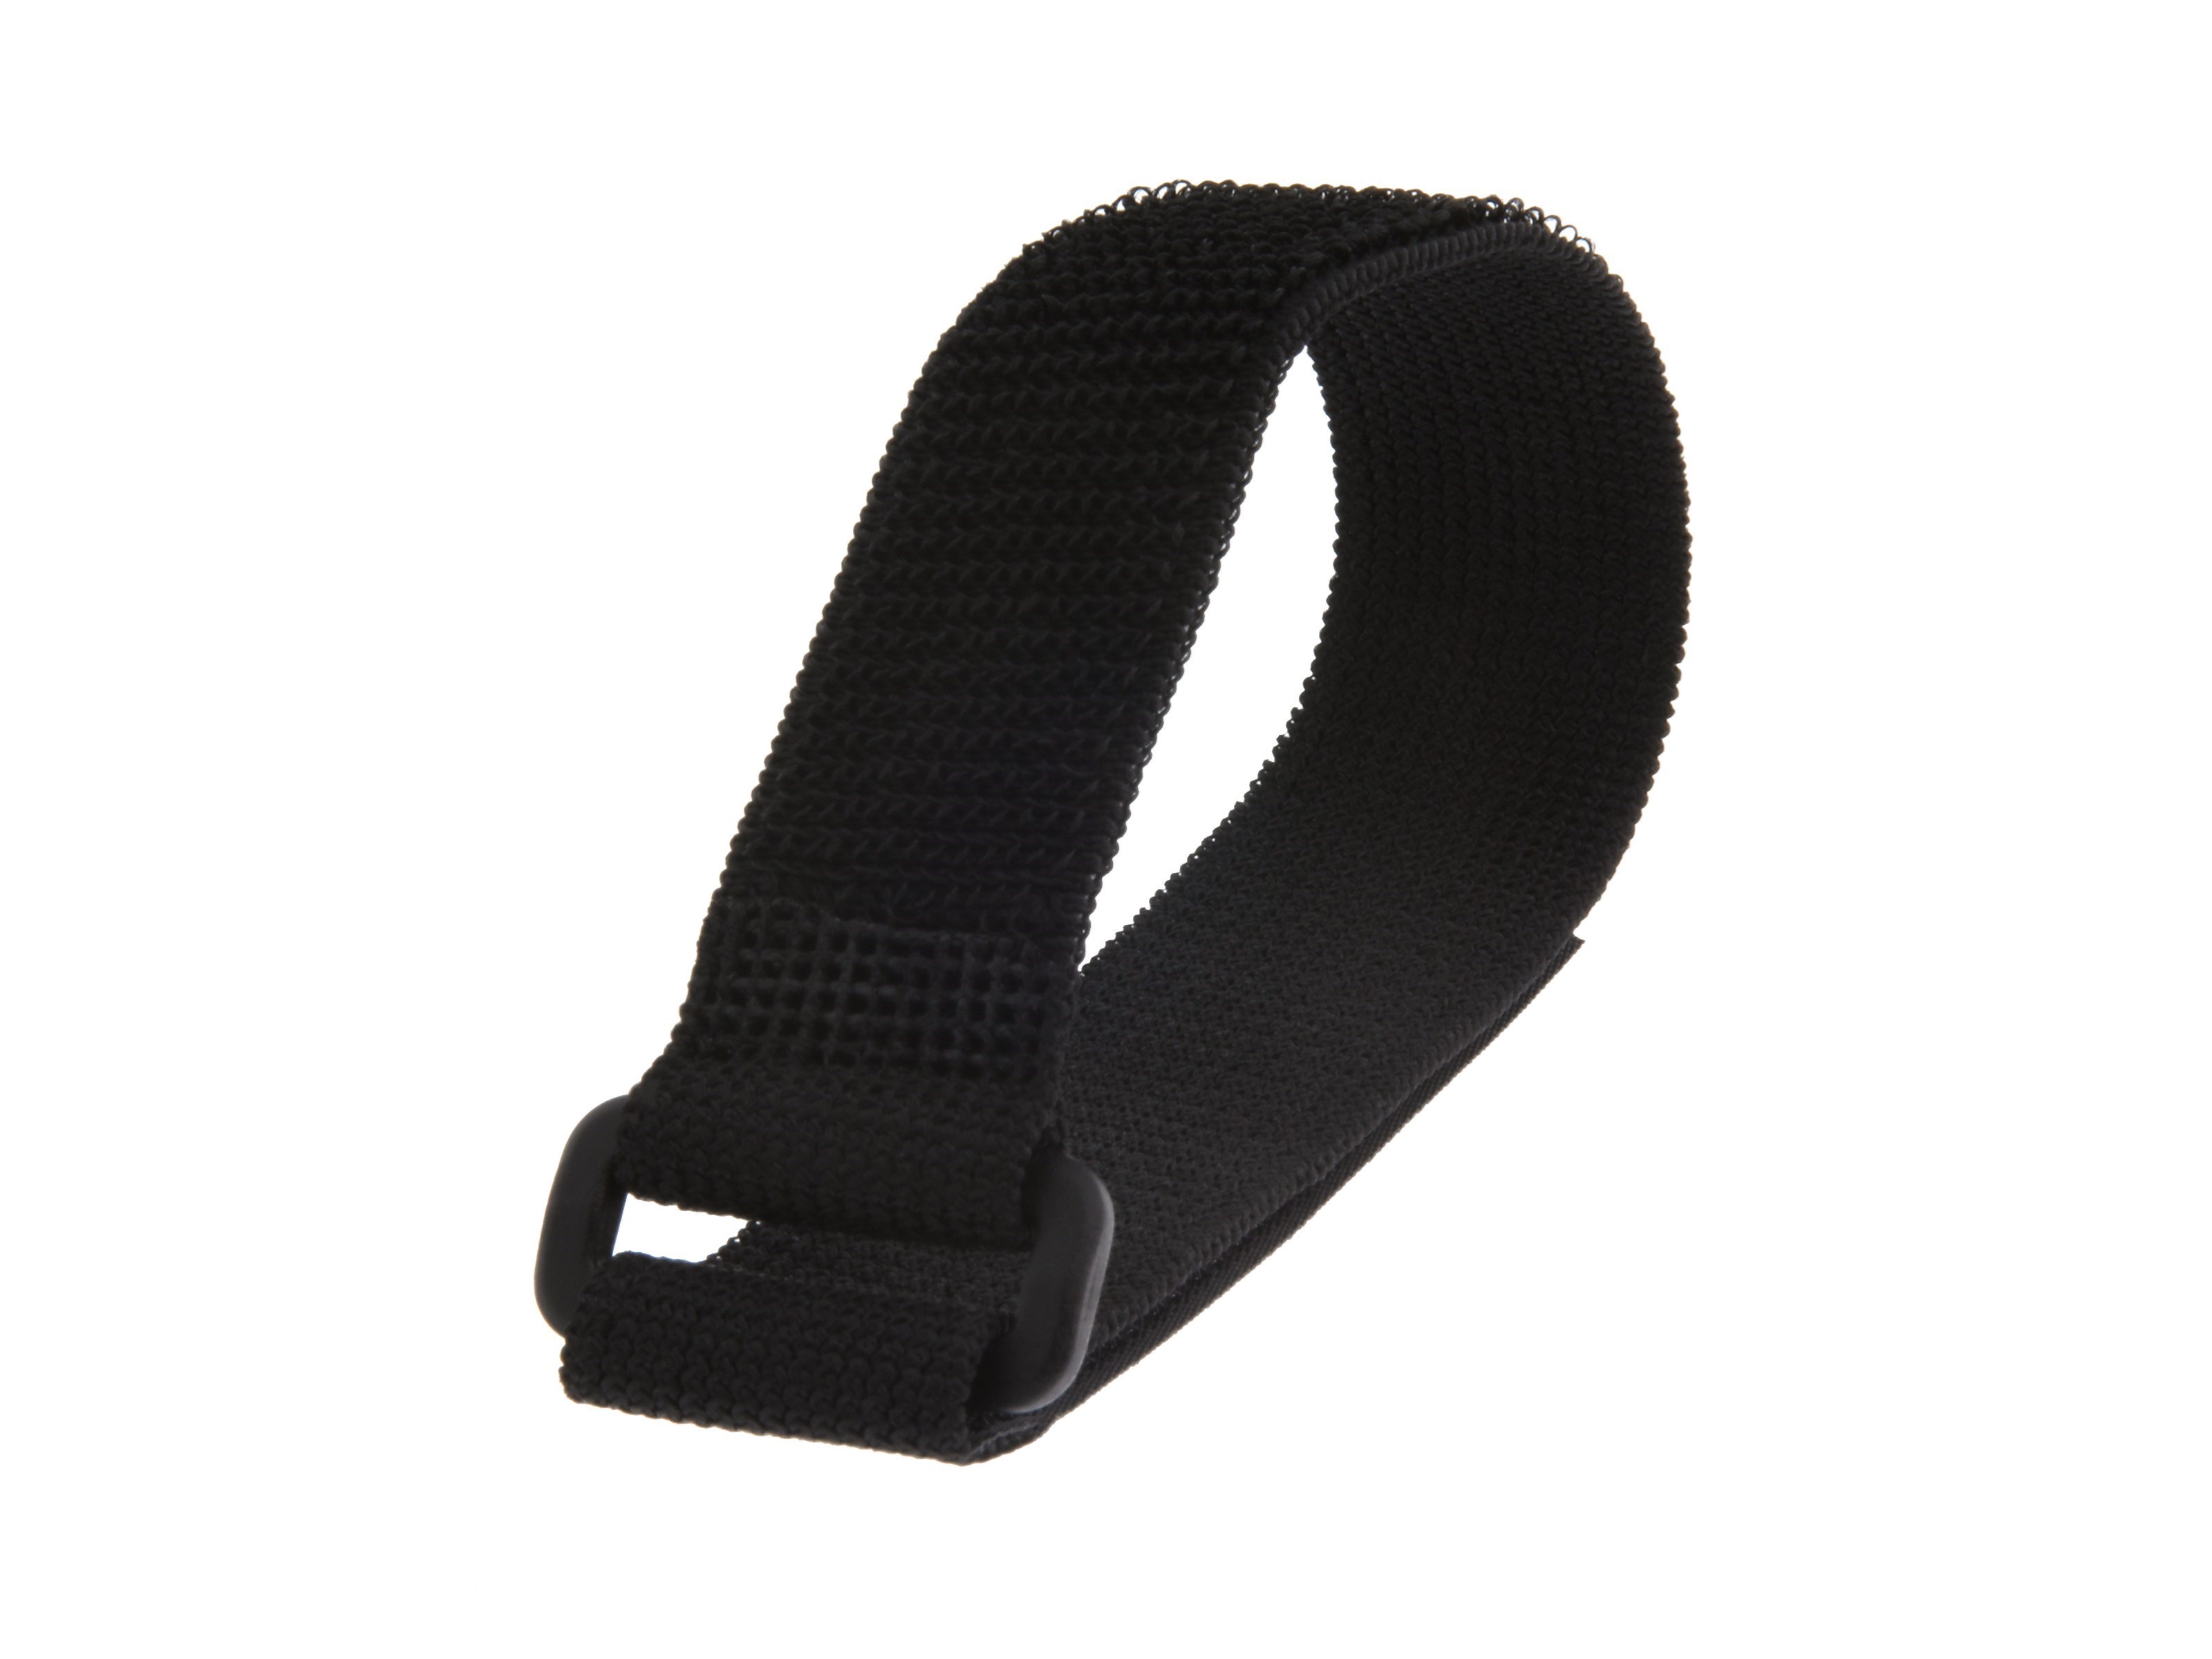 All Purpose Elastic Cinch Strap - 12 x 1 Inch - 5 Pack at Cables N More